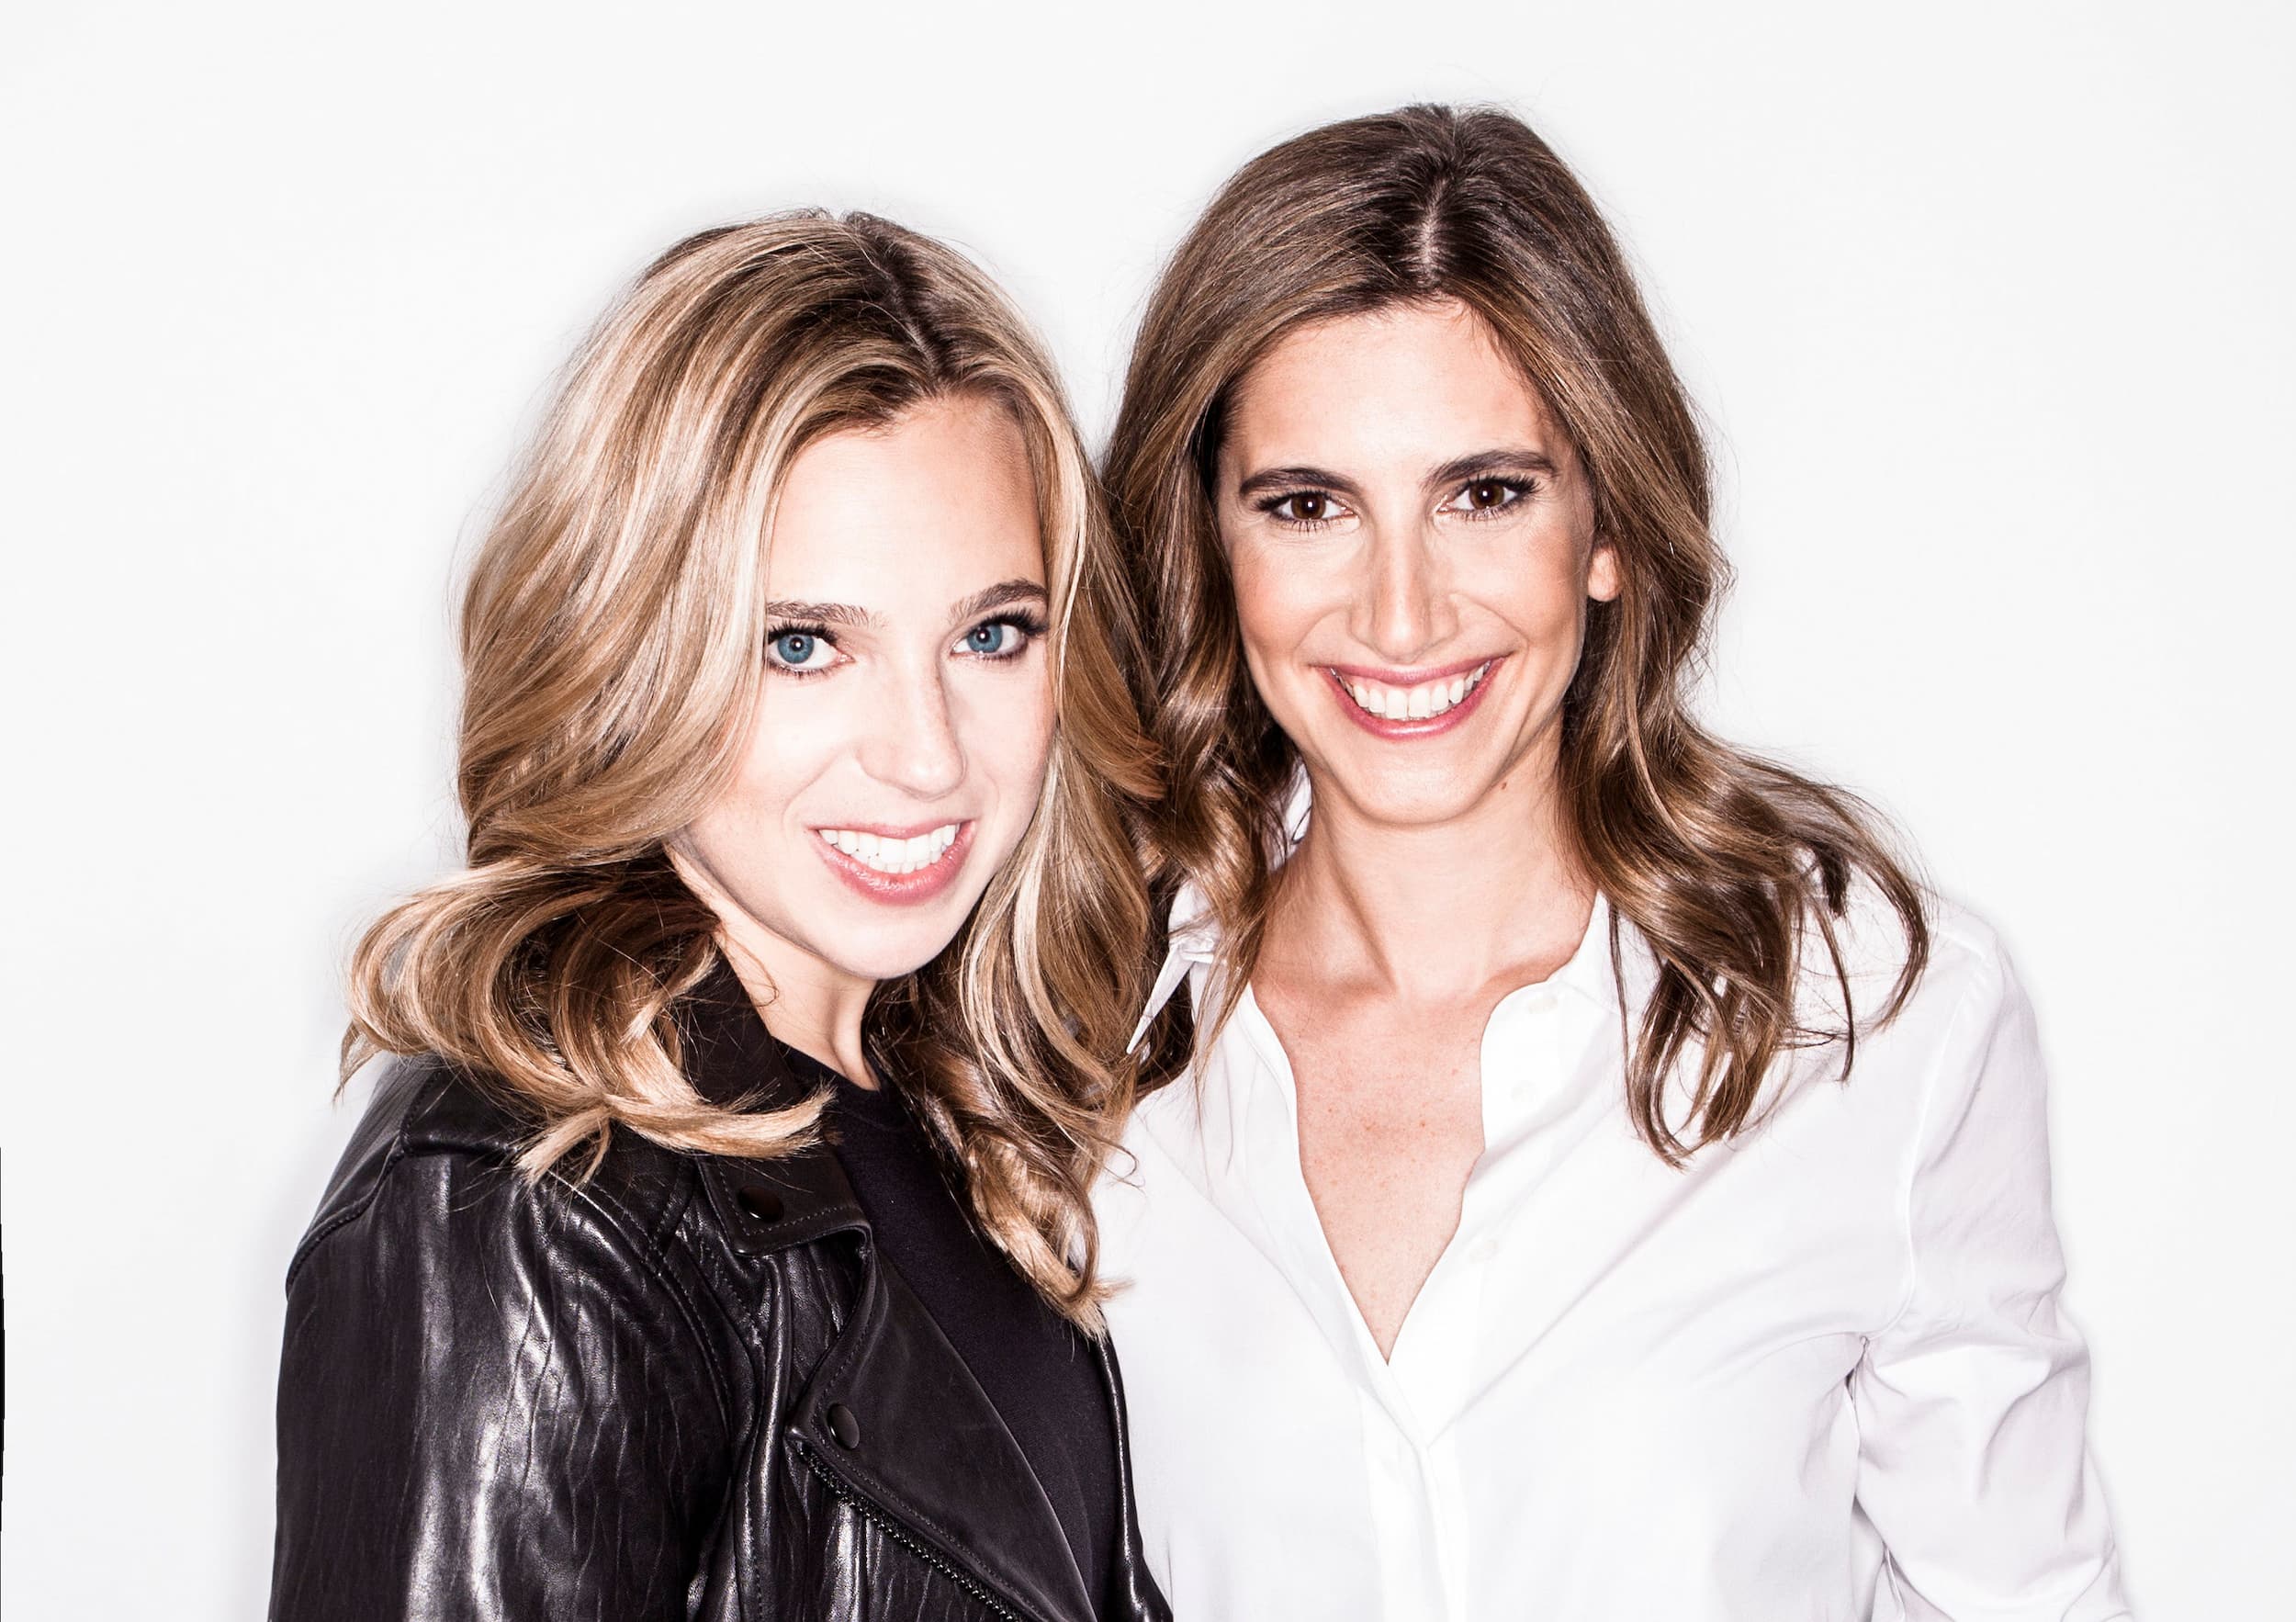 Portrait of Carly and Danielle of theSkimm